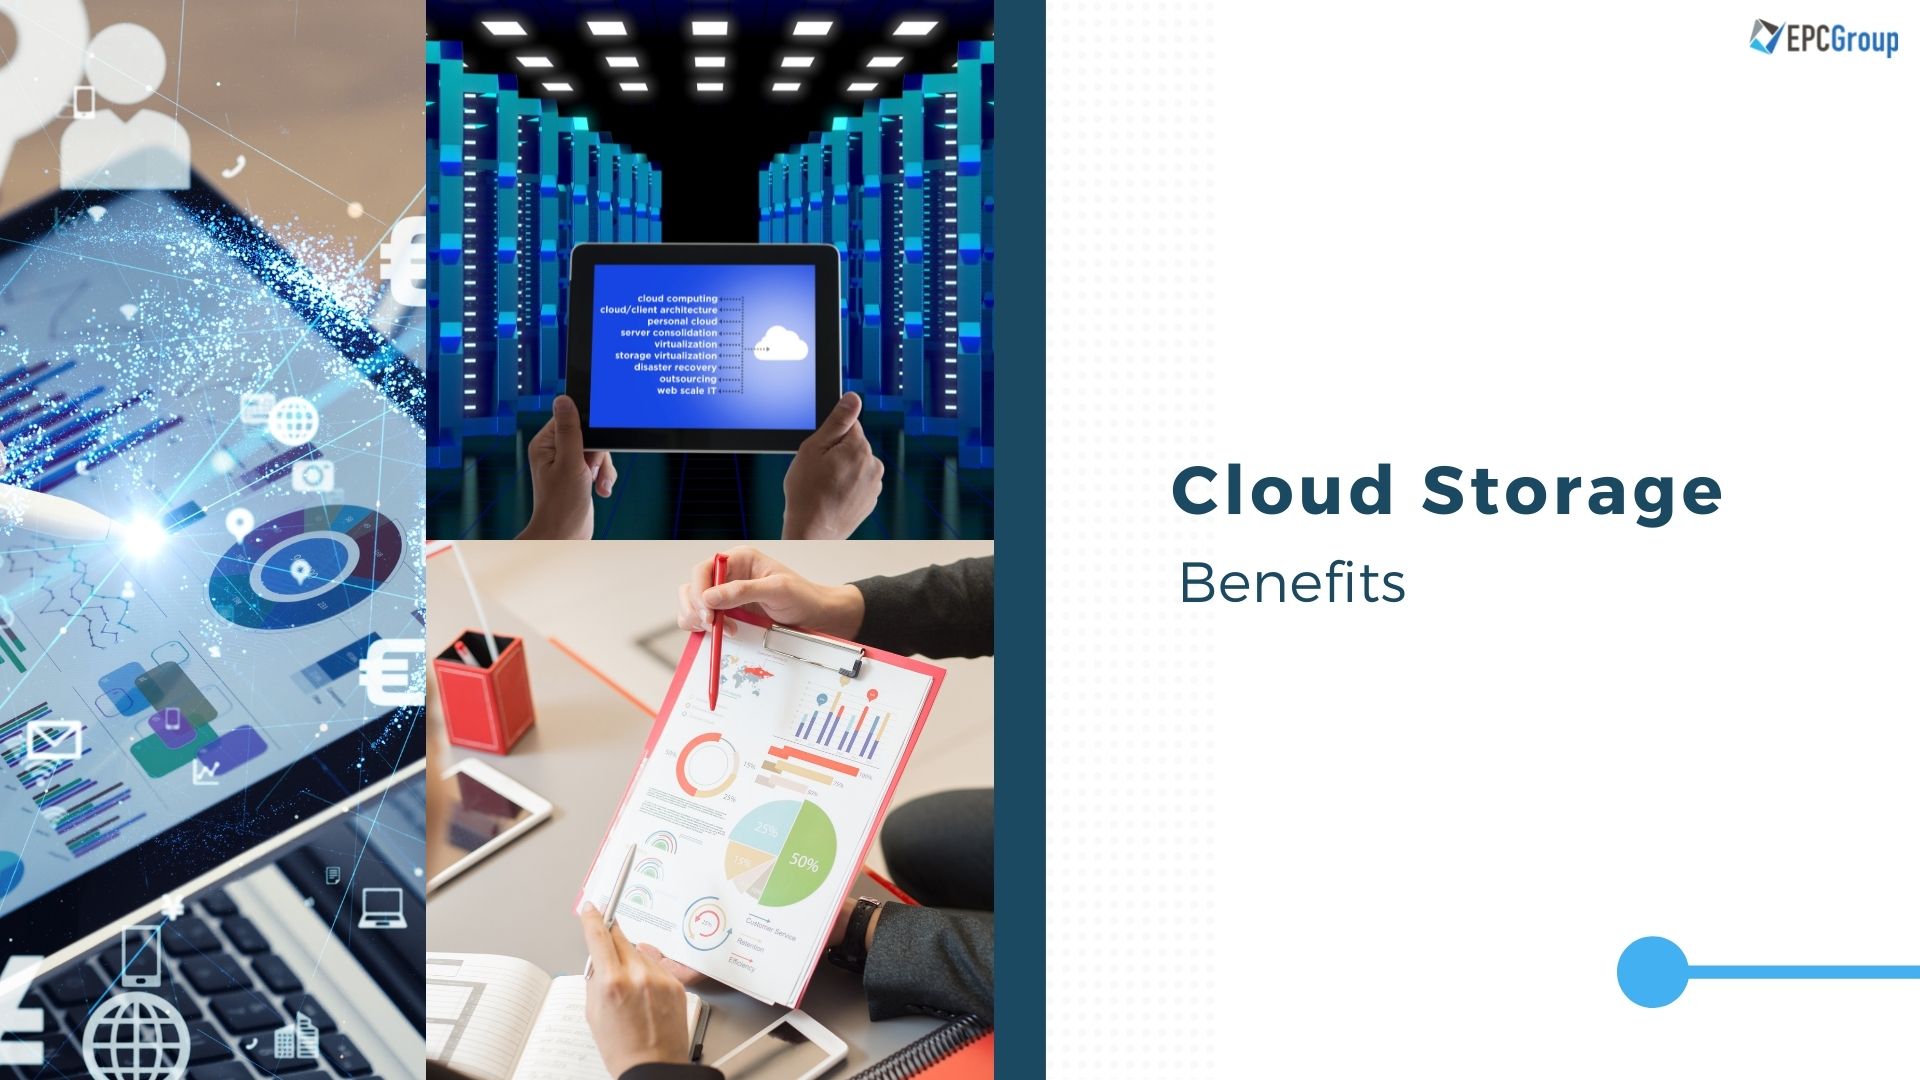 What Are The Benefits Of Cloud Storage For An Organization?